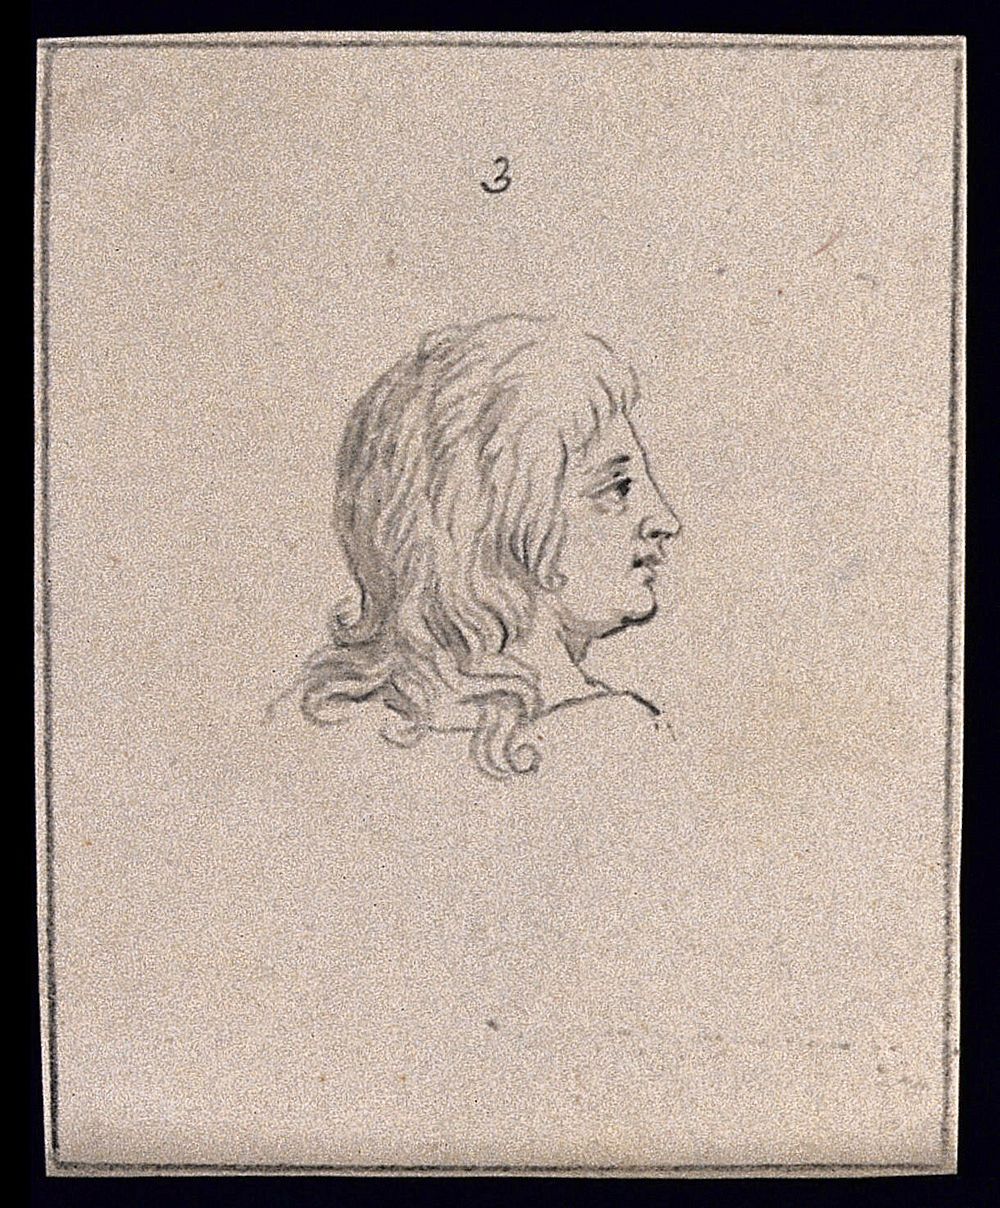 An ideal human head looking at something distant. Drawing, c. 1794, after N. Poussin.